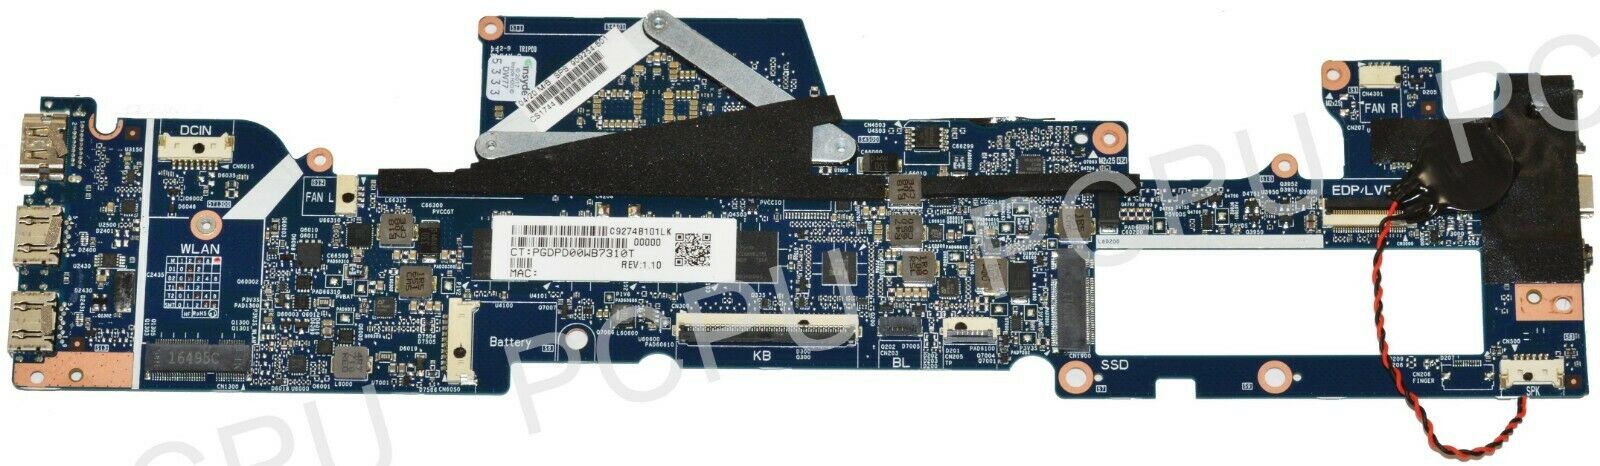 HP Envy 13-AB Laptop Motherboard 8GB w/ Intel i7-7500U 2.7Ghz CPU 909254-601 CPU Speed: 2.7 Ghz Capacity pe - Click Image to Close